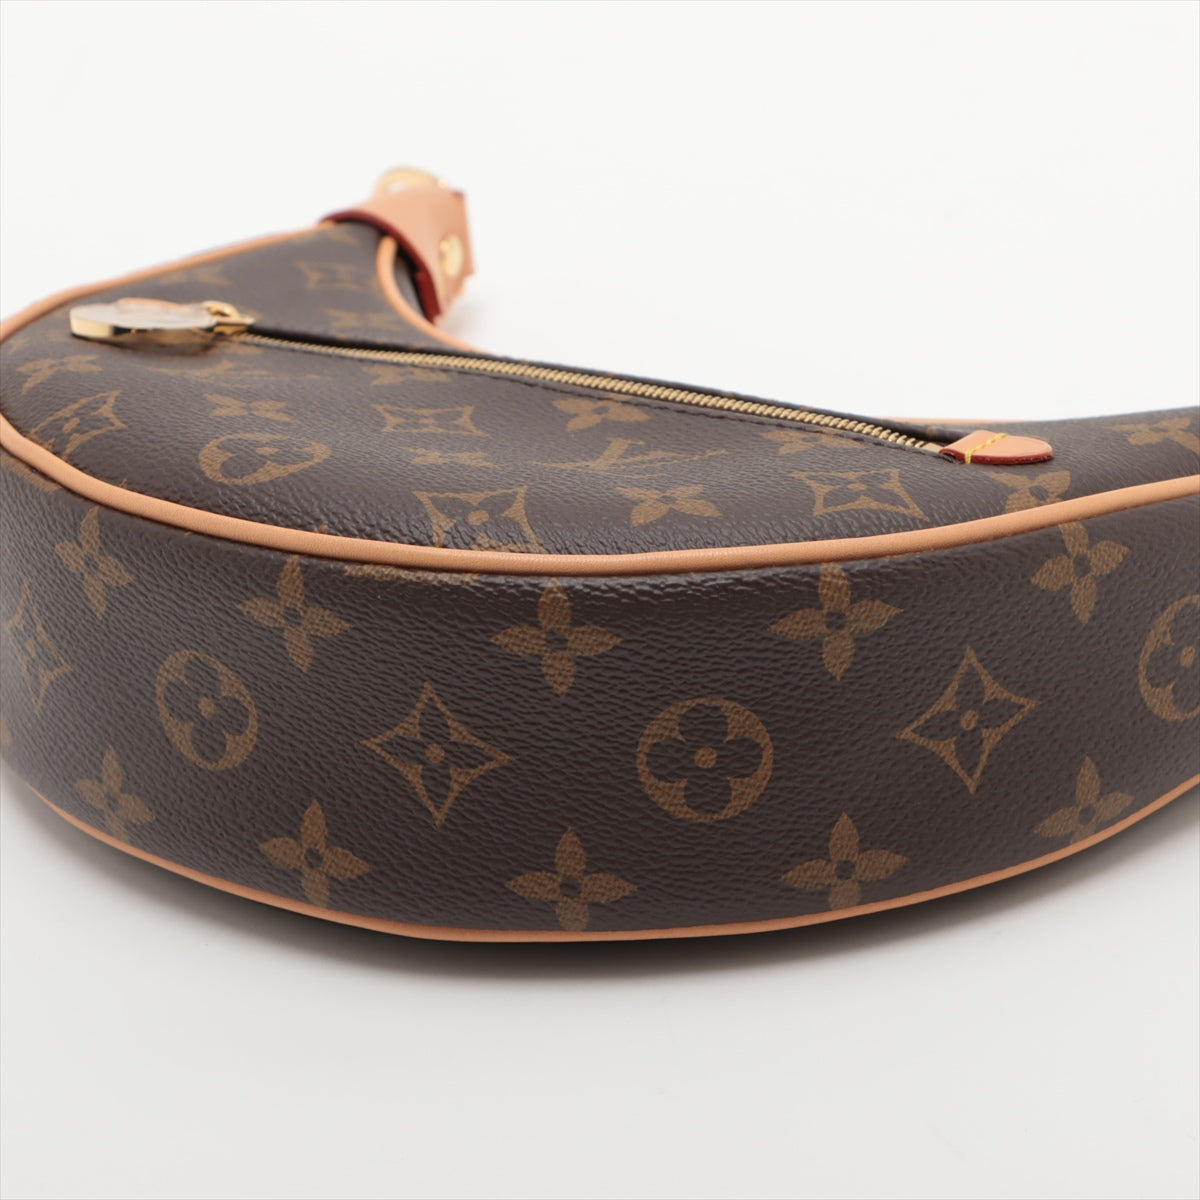 Louis Vuitton Monogram Loop M81098 There was an RFID response